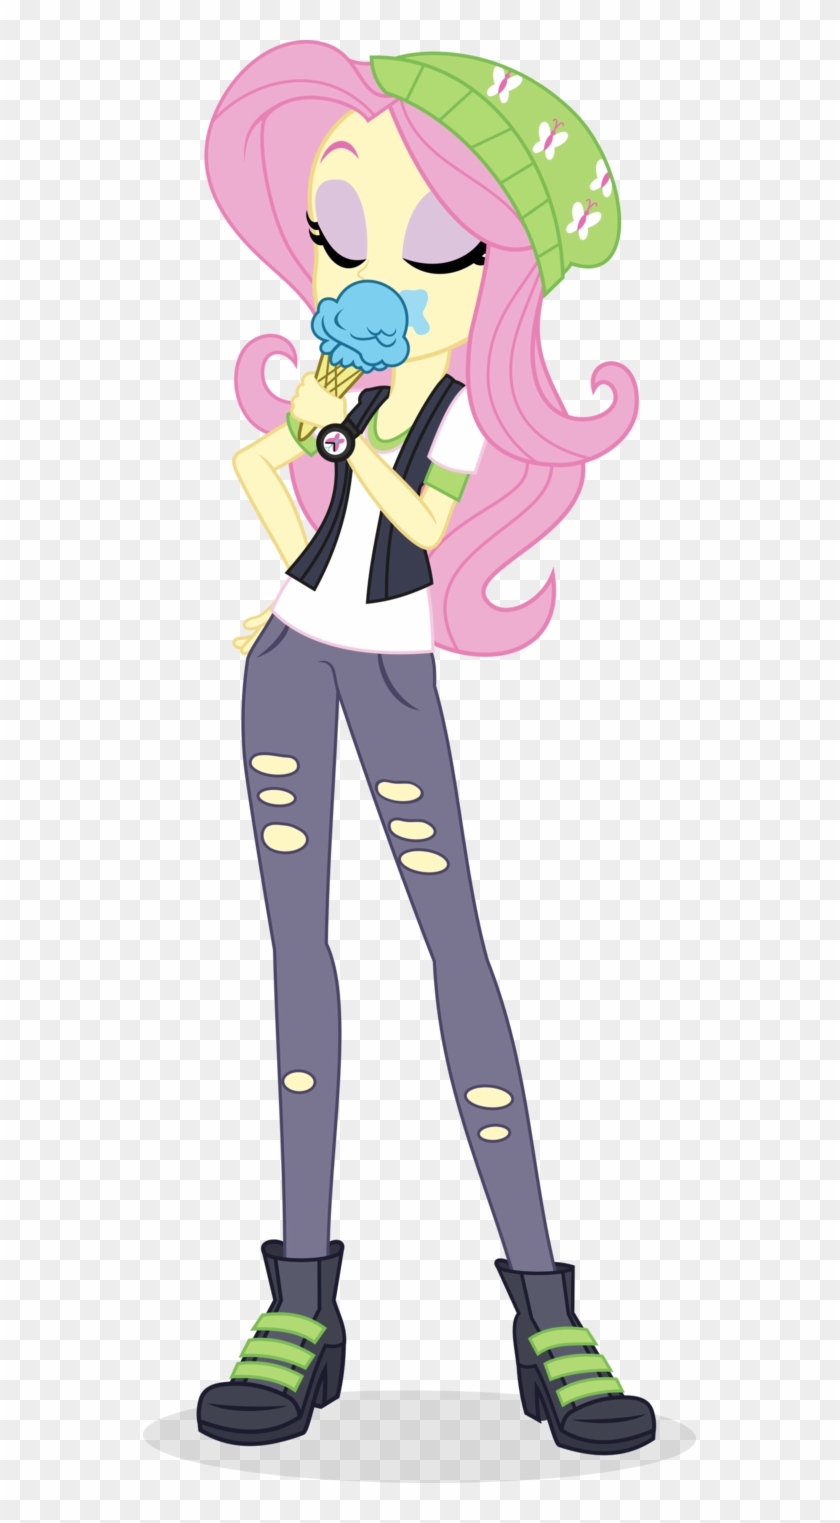 Fluttershy Likes Ice Cream By Punzil504 - Equestria Girls Alternate Universe Twilight Sparkle #553015